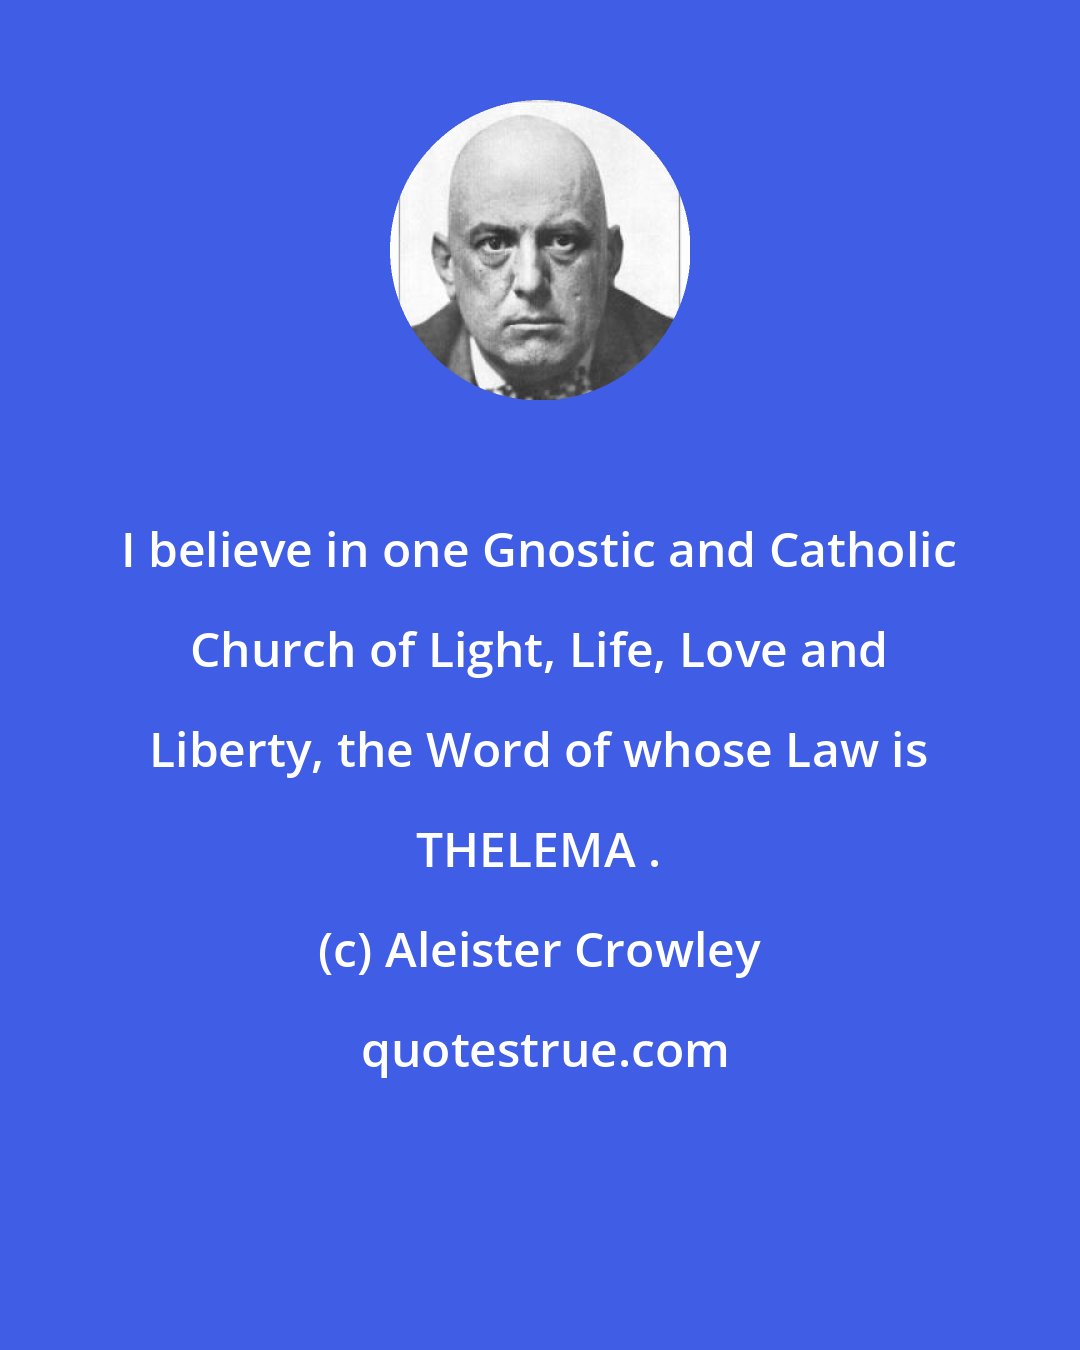 Aleister Crowley: I believe in one Gnostic and Catholic Church of Light, Life, Love and Liberty, the Word of whose Law is THELEMA .